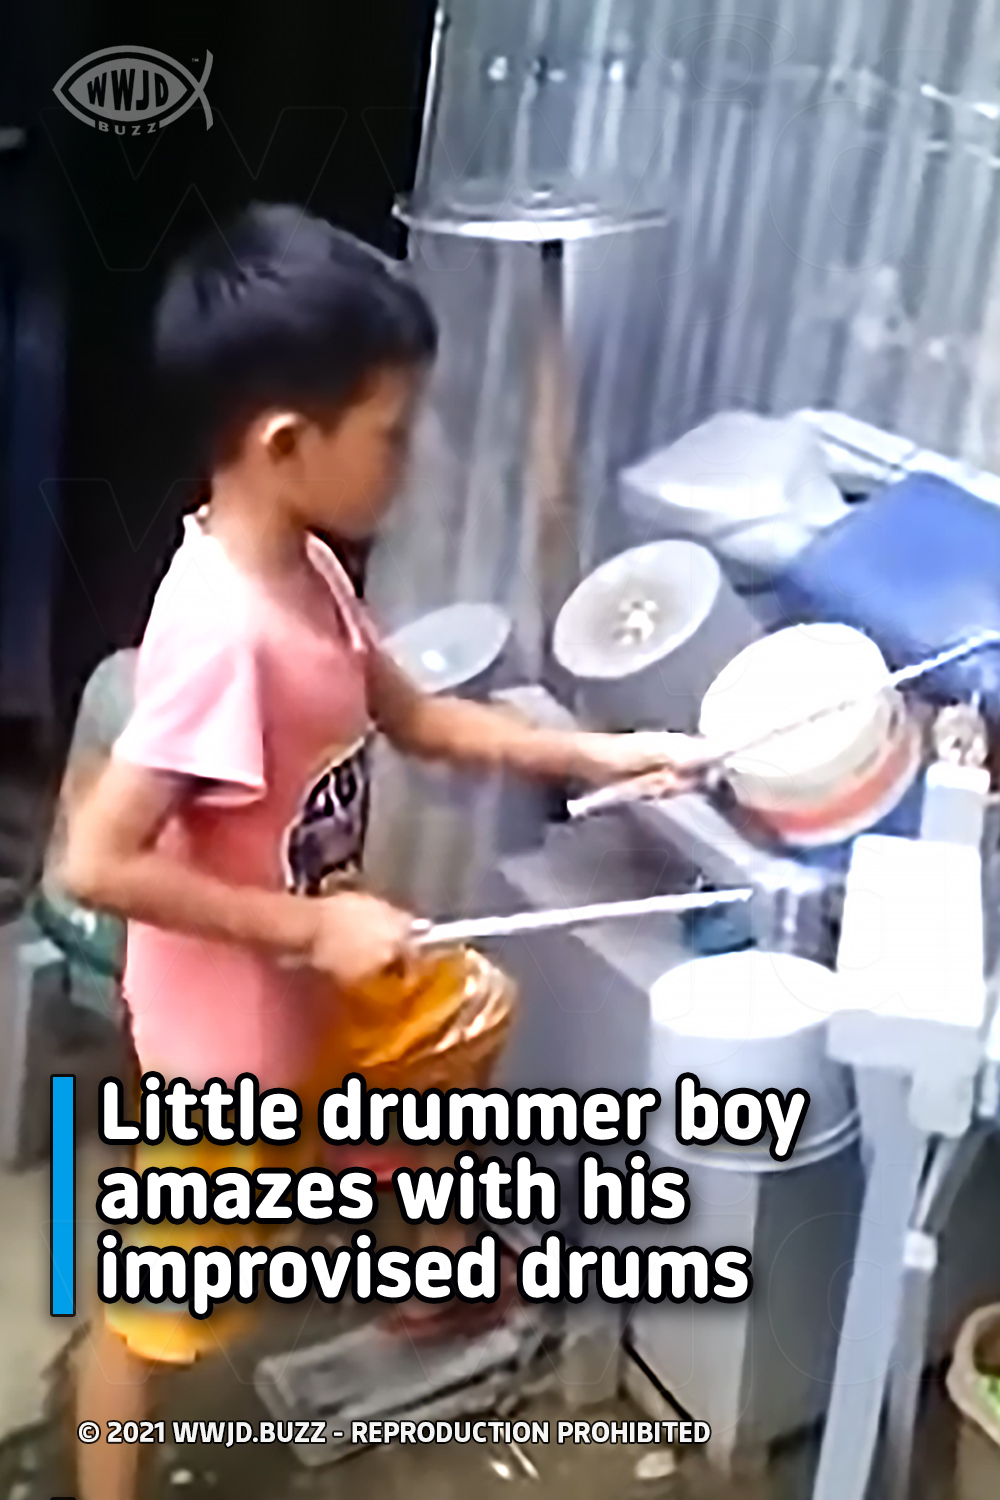 Little drummer boy amazes with his improvised drums